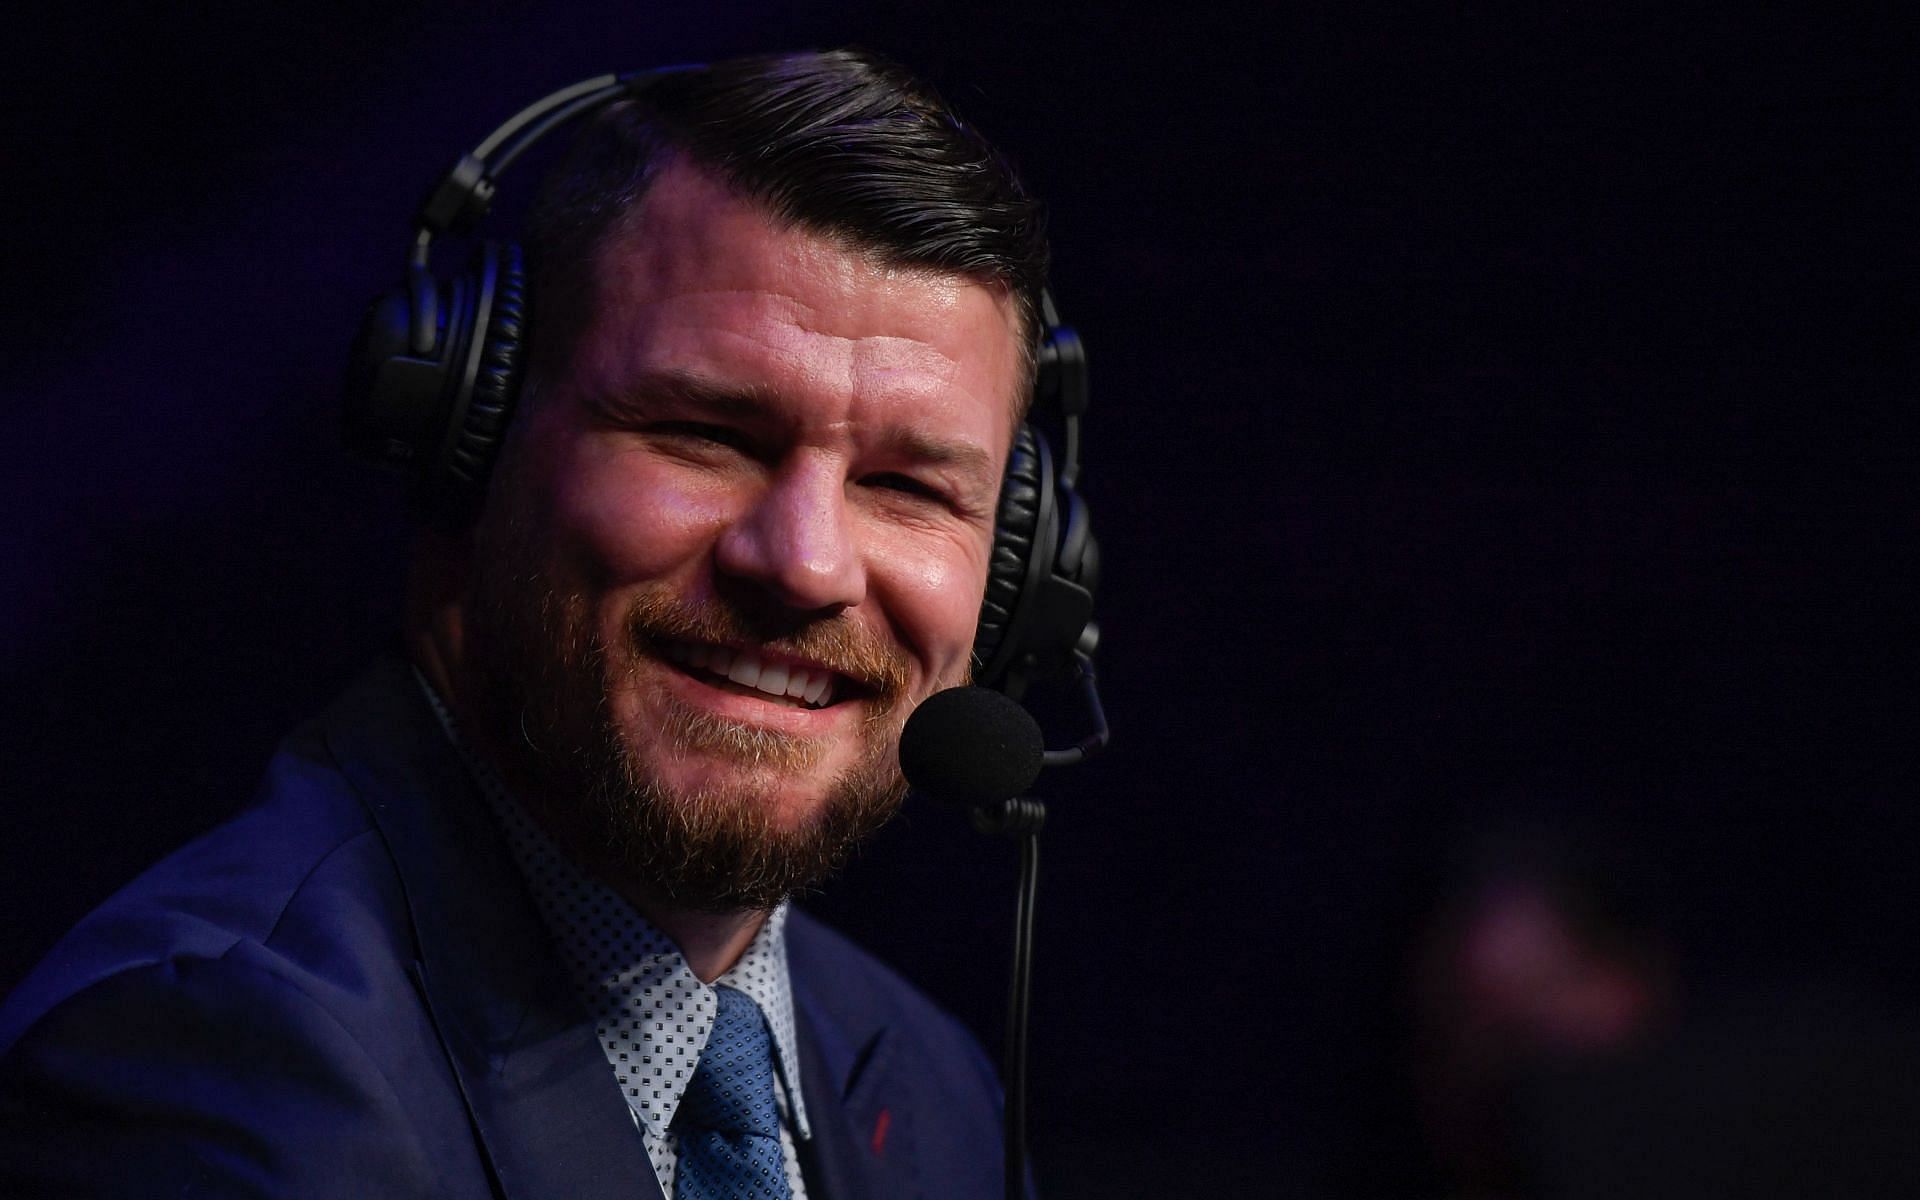 Michael Bisping shares the experience of an old kickboxing fight.